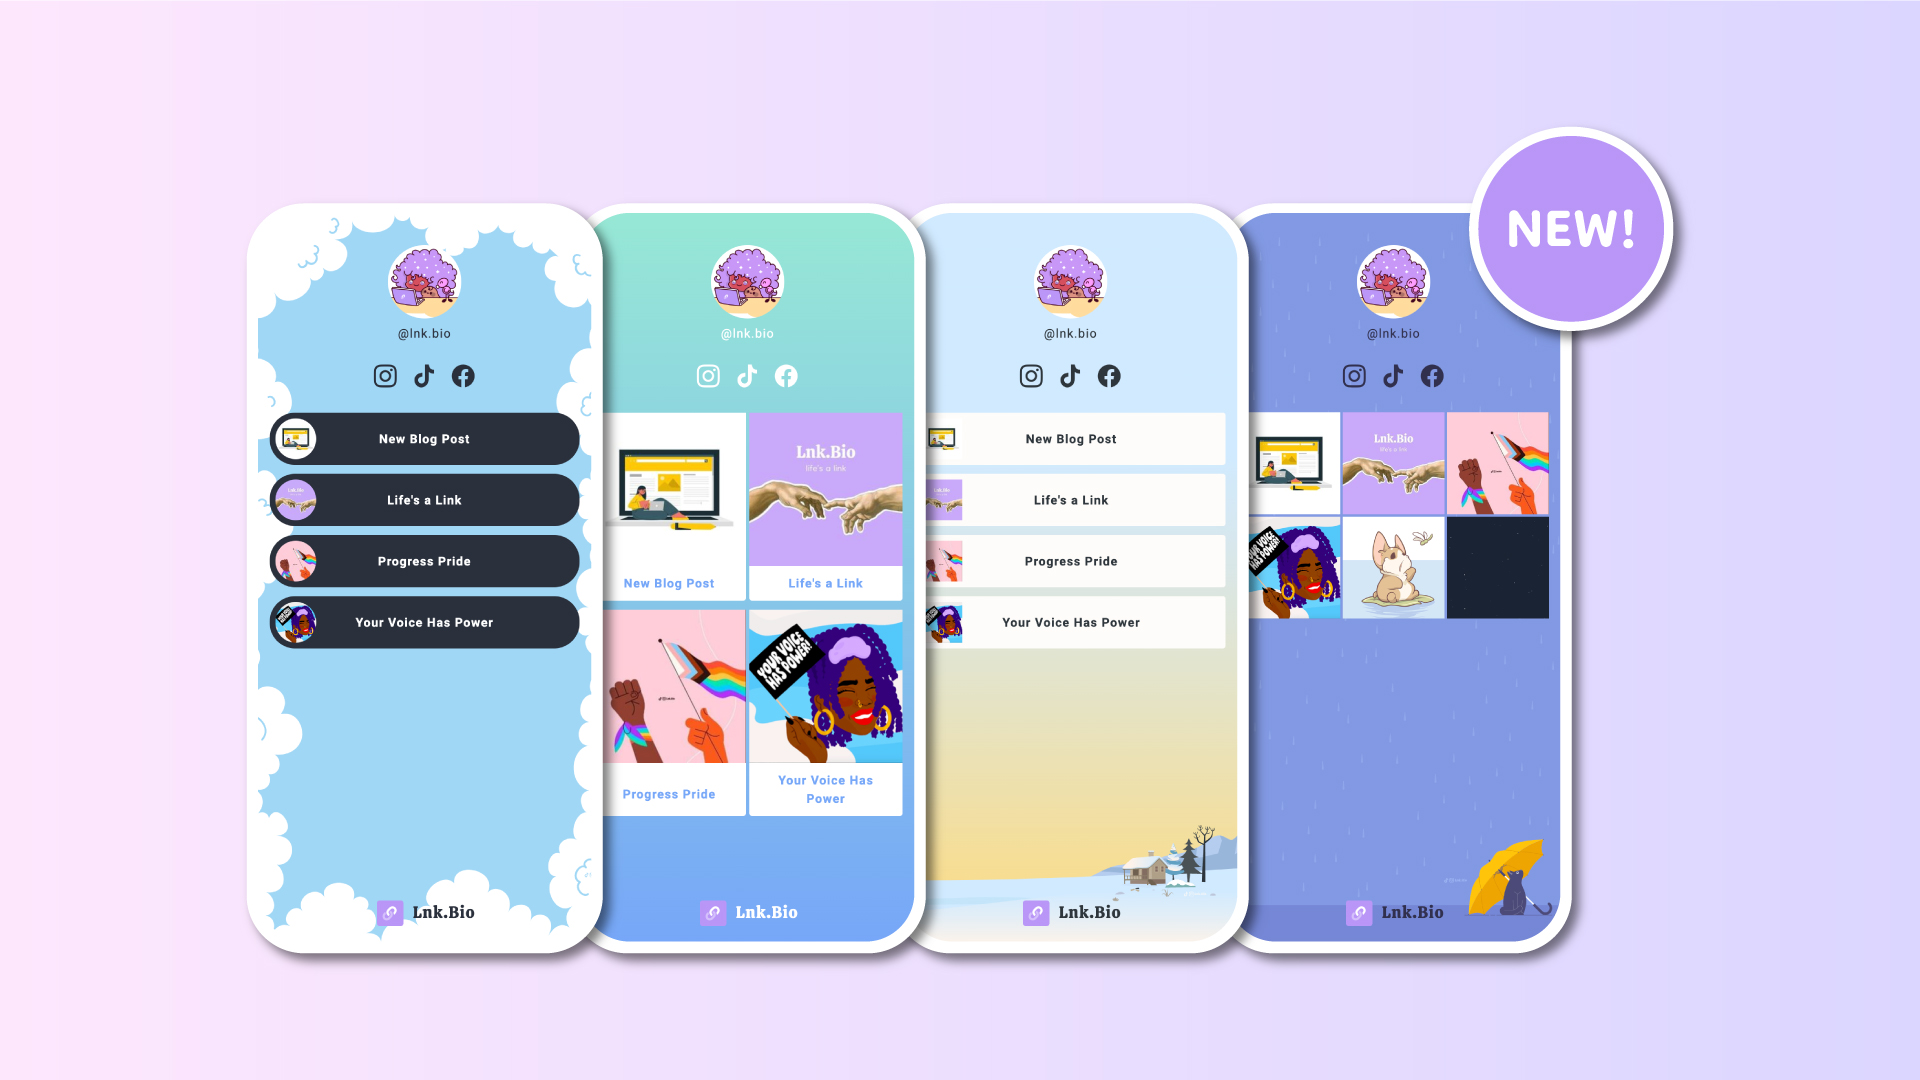 29 New Themes 🎨 Based On The Communities Requests